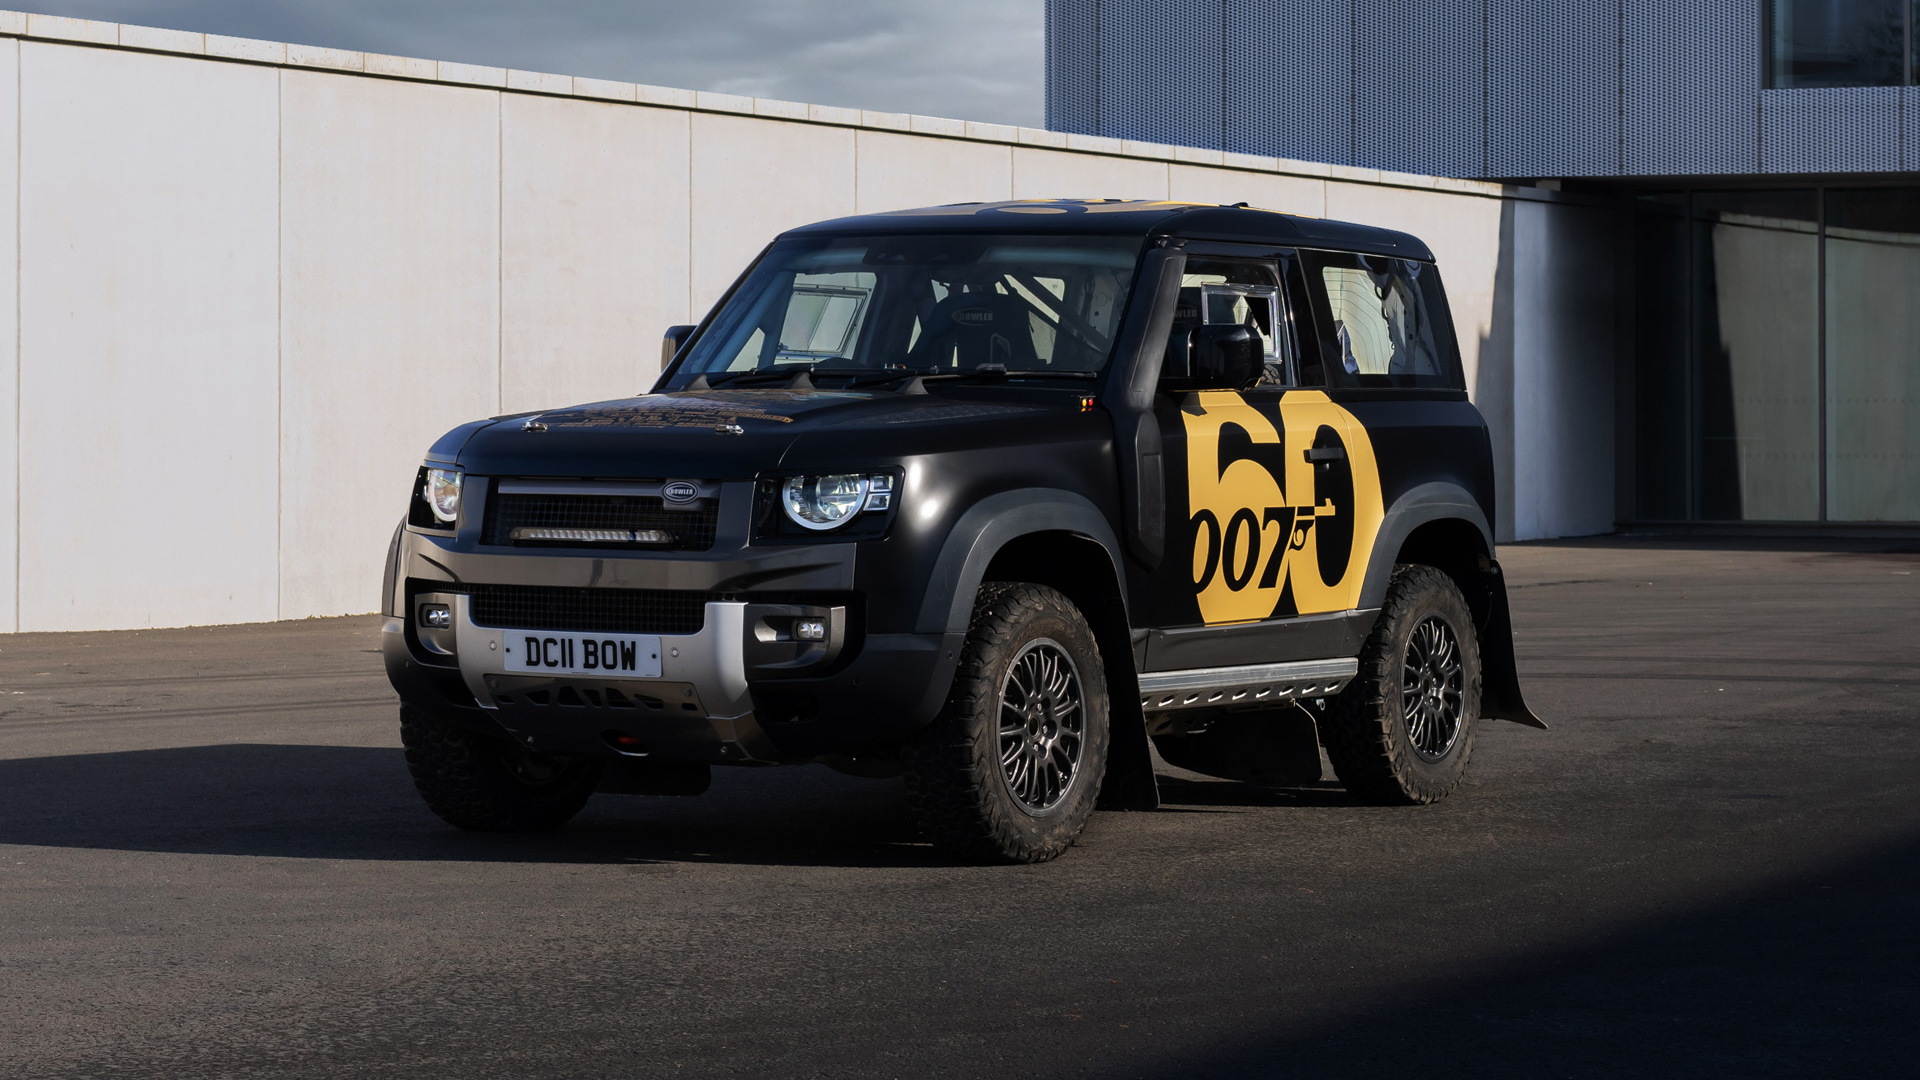 Land Rover Defender 90 with 60 years of James Bond livery